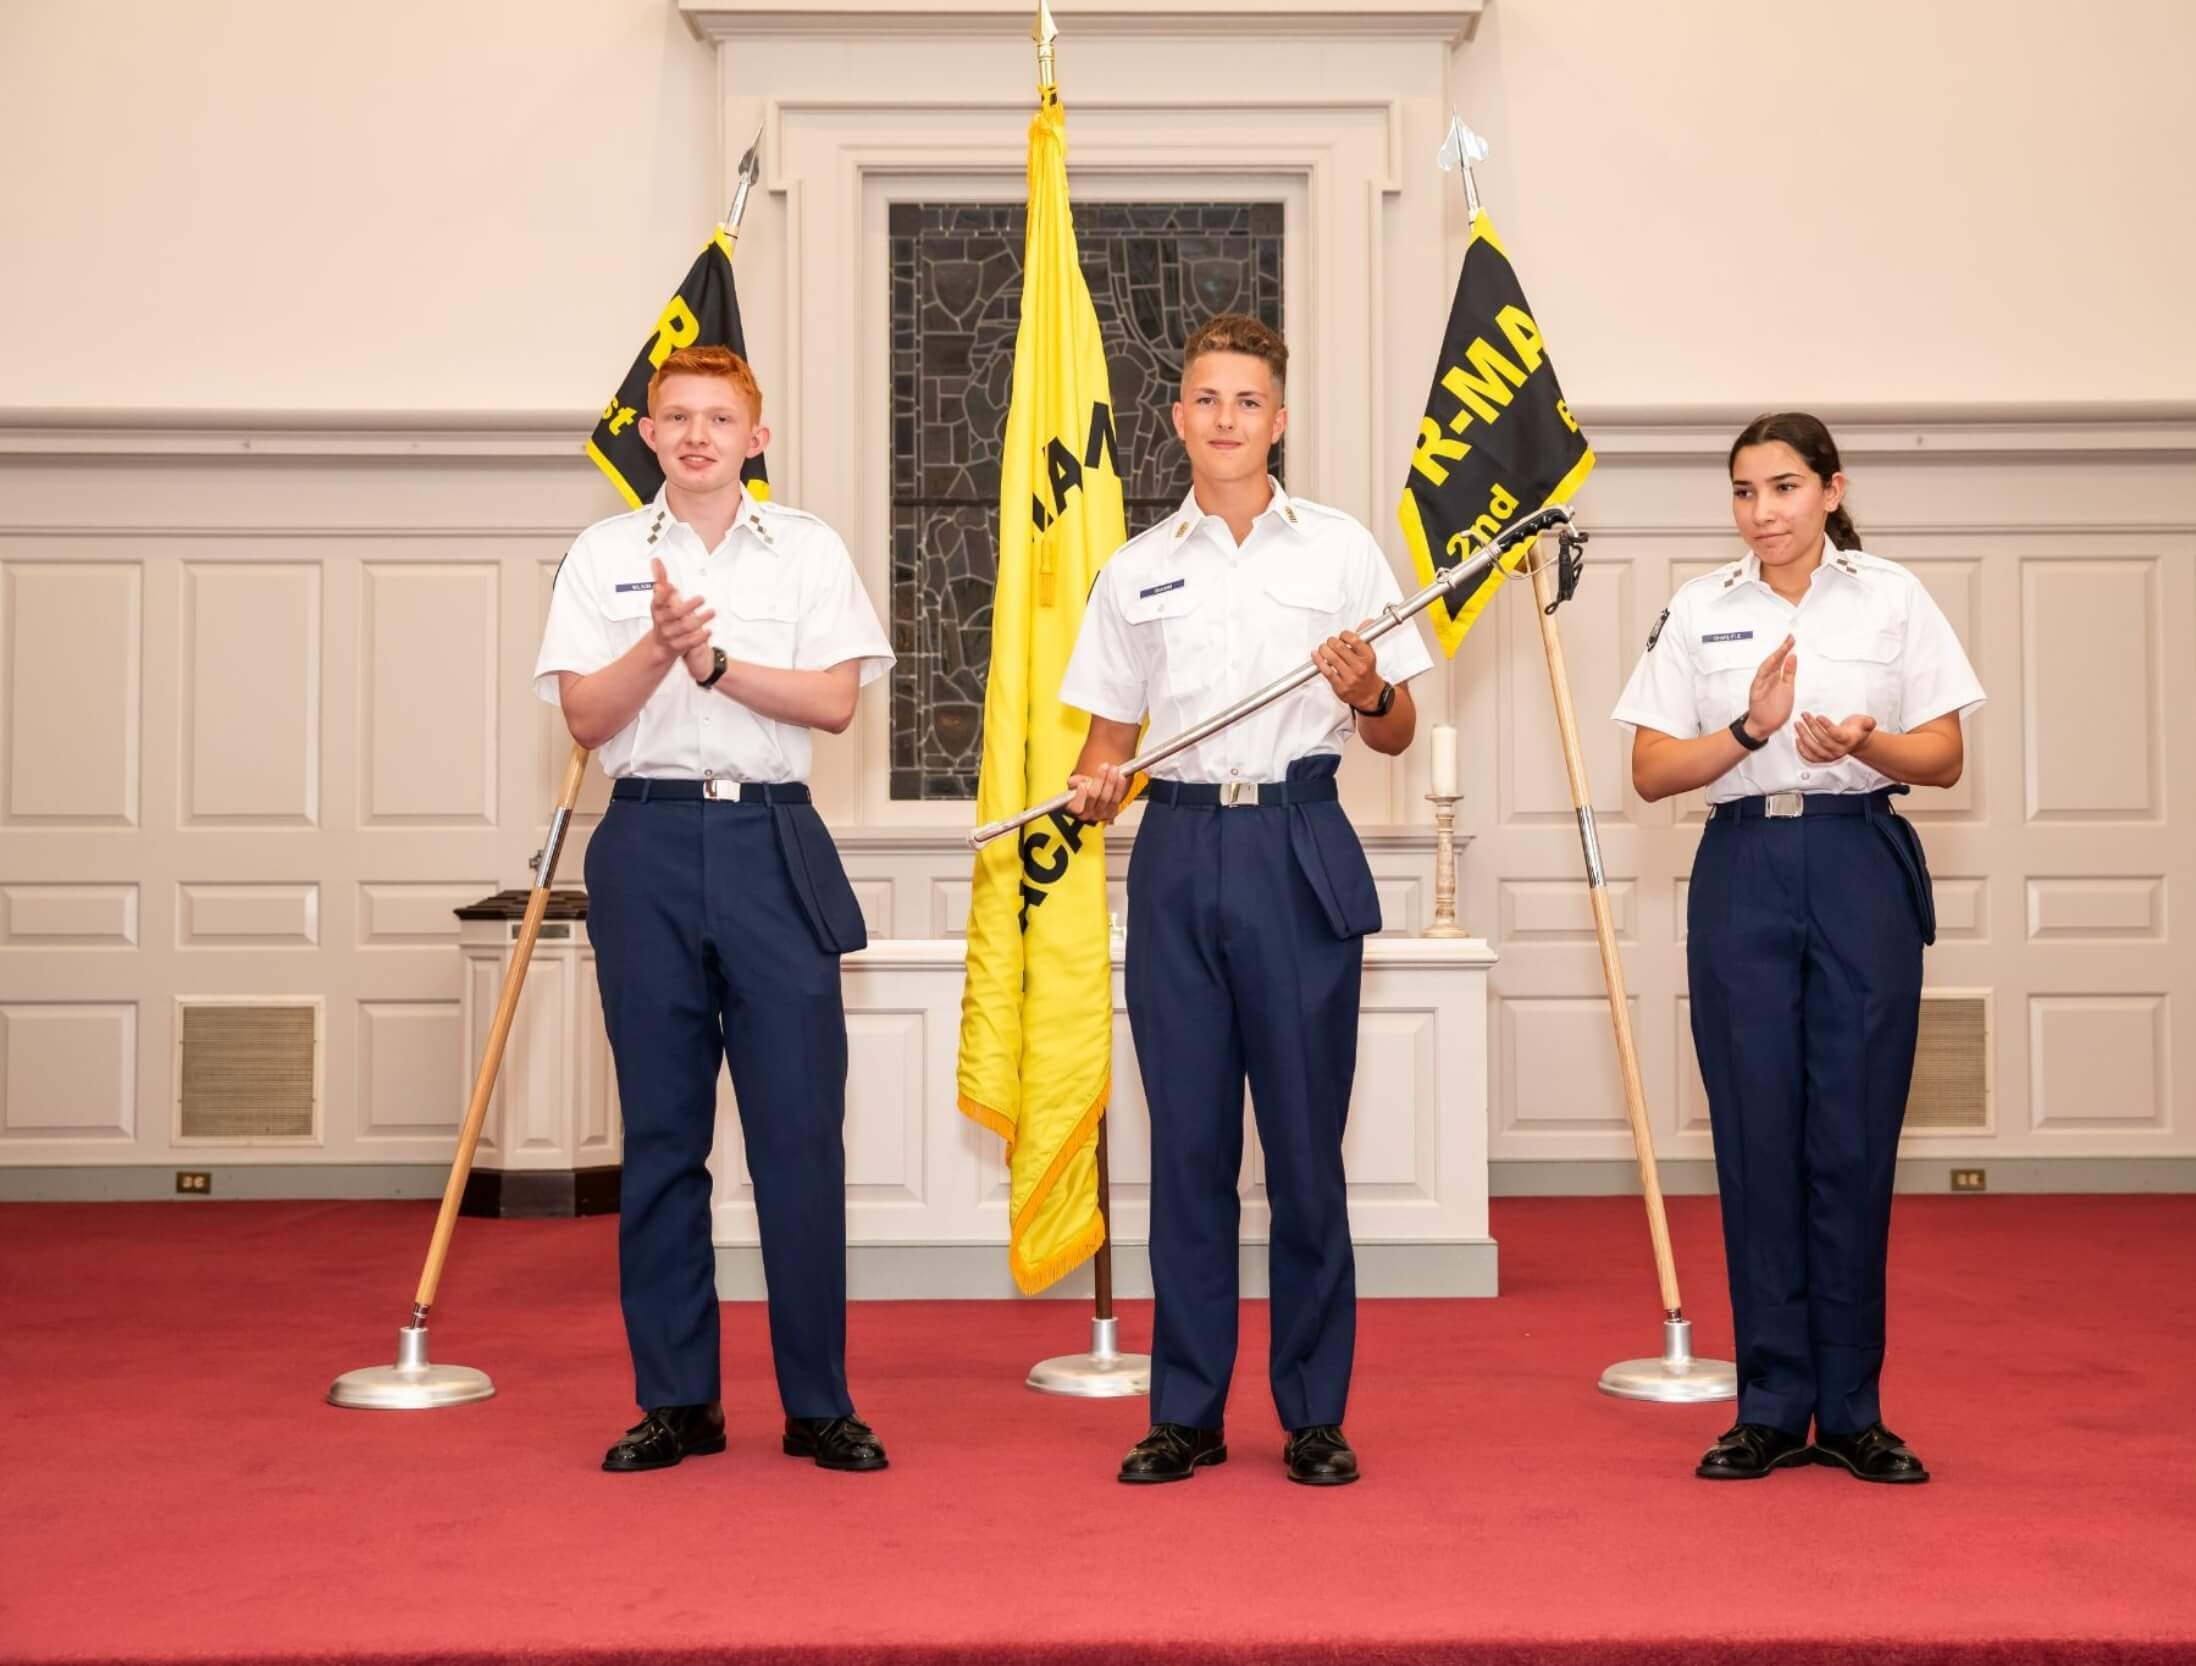 Three R-MA students in the Cadet Leadership Development Program on a stage clapping.